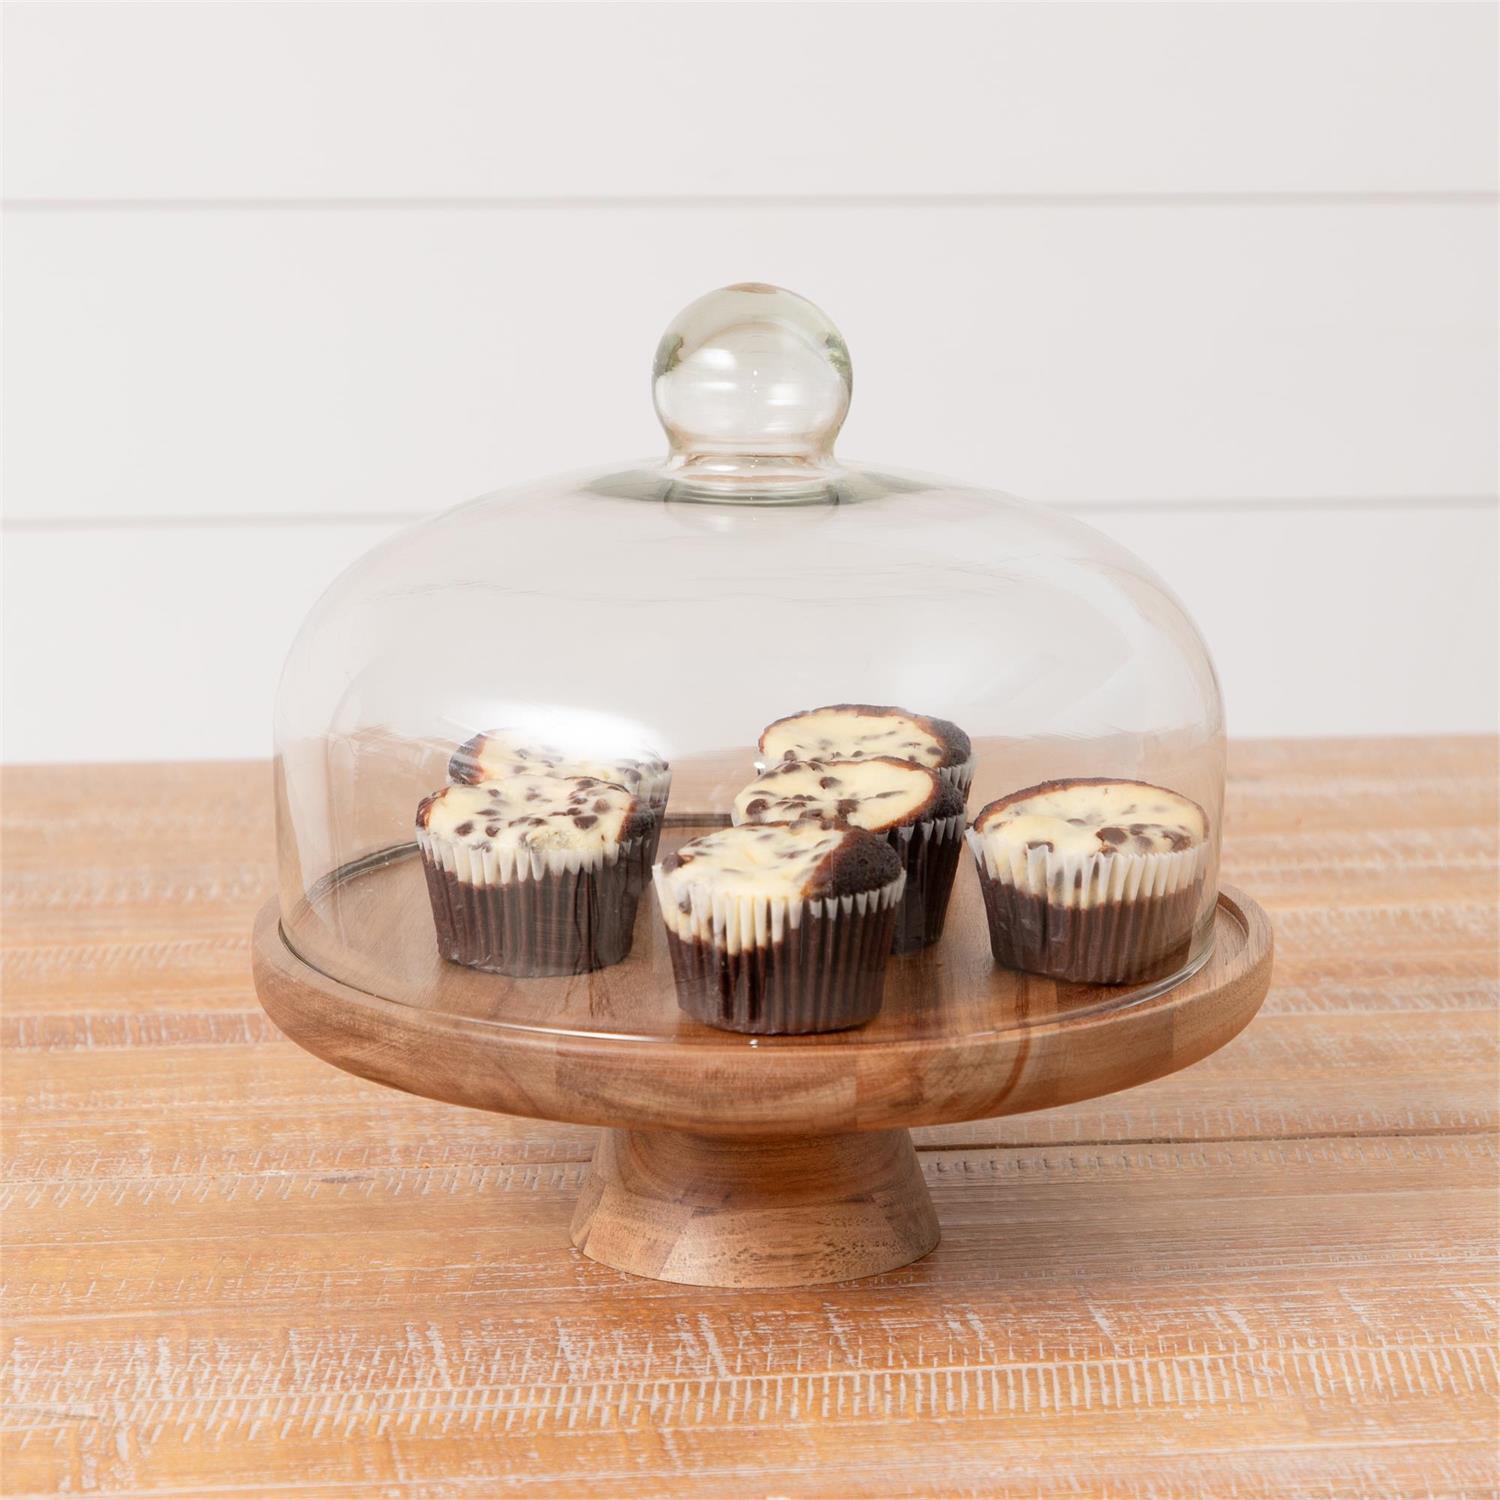 Wood Cake Stand With Glass Dome